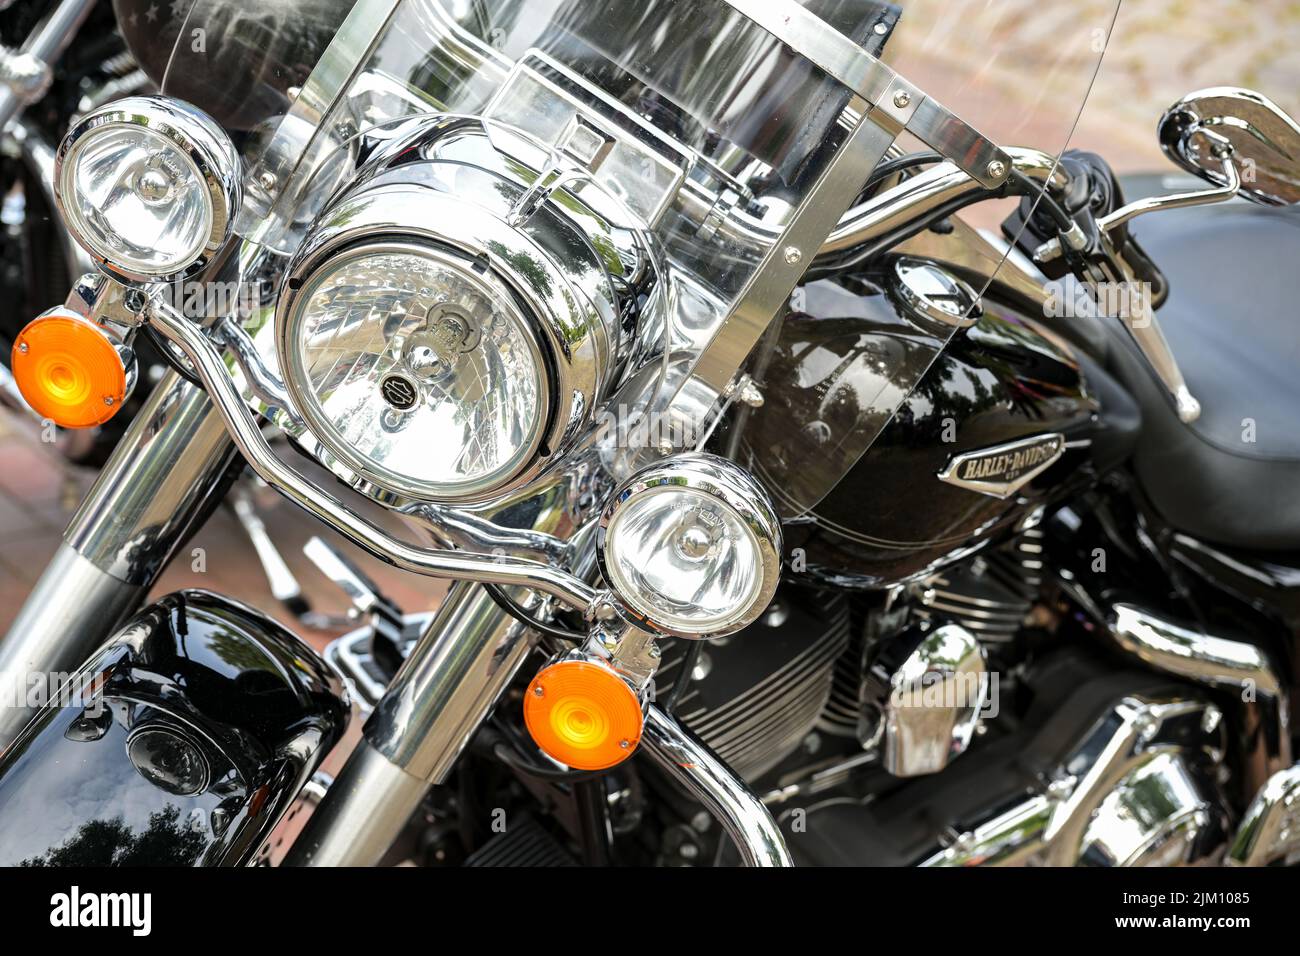 Ratzeburg, Germany, July 31, 2022: Part of a Harley Davidson motorcycle from the front with headlights, orange lamps and chrome, selected focus, narro Stock Photo